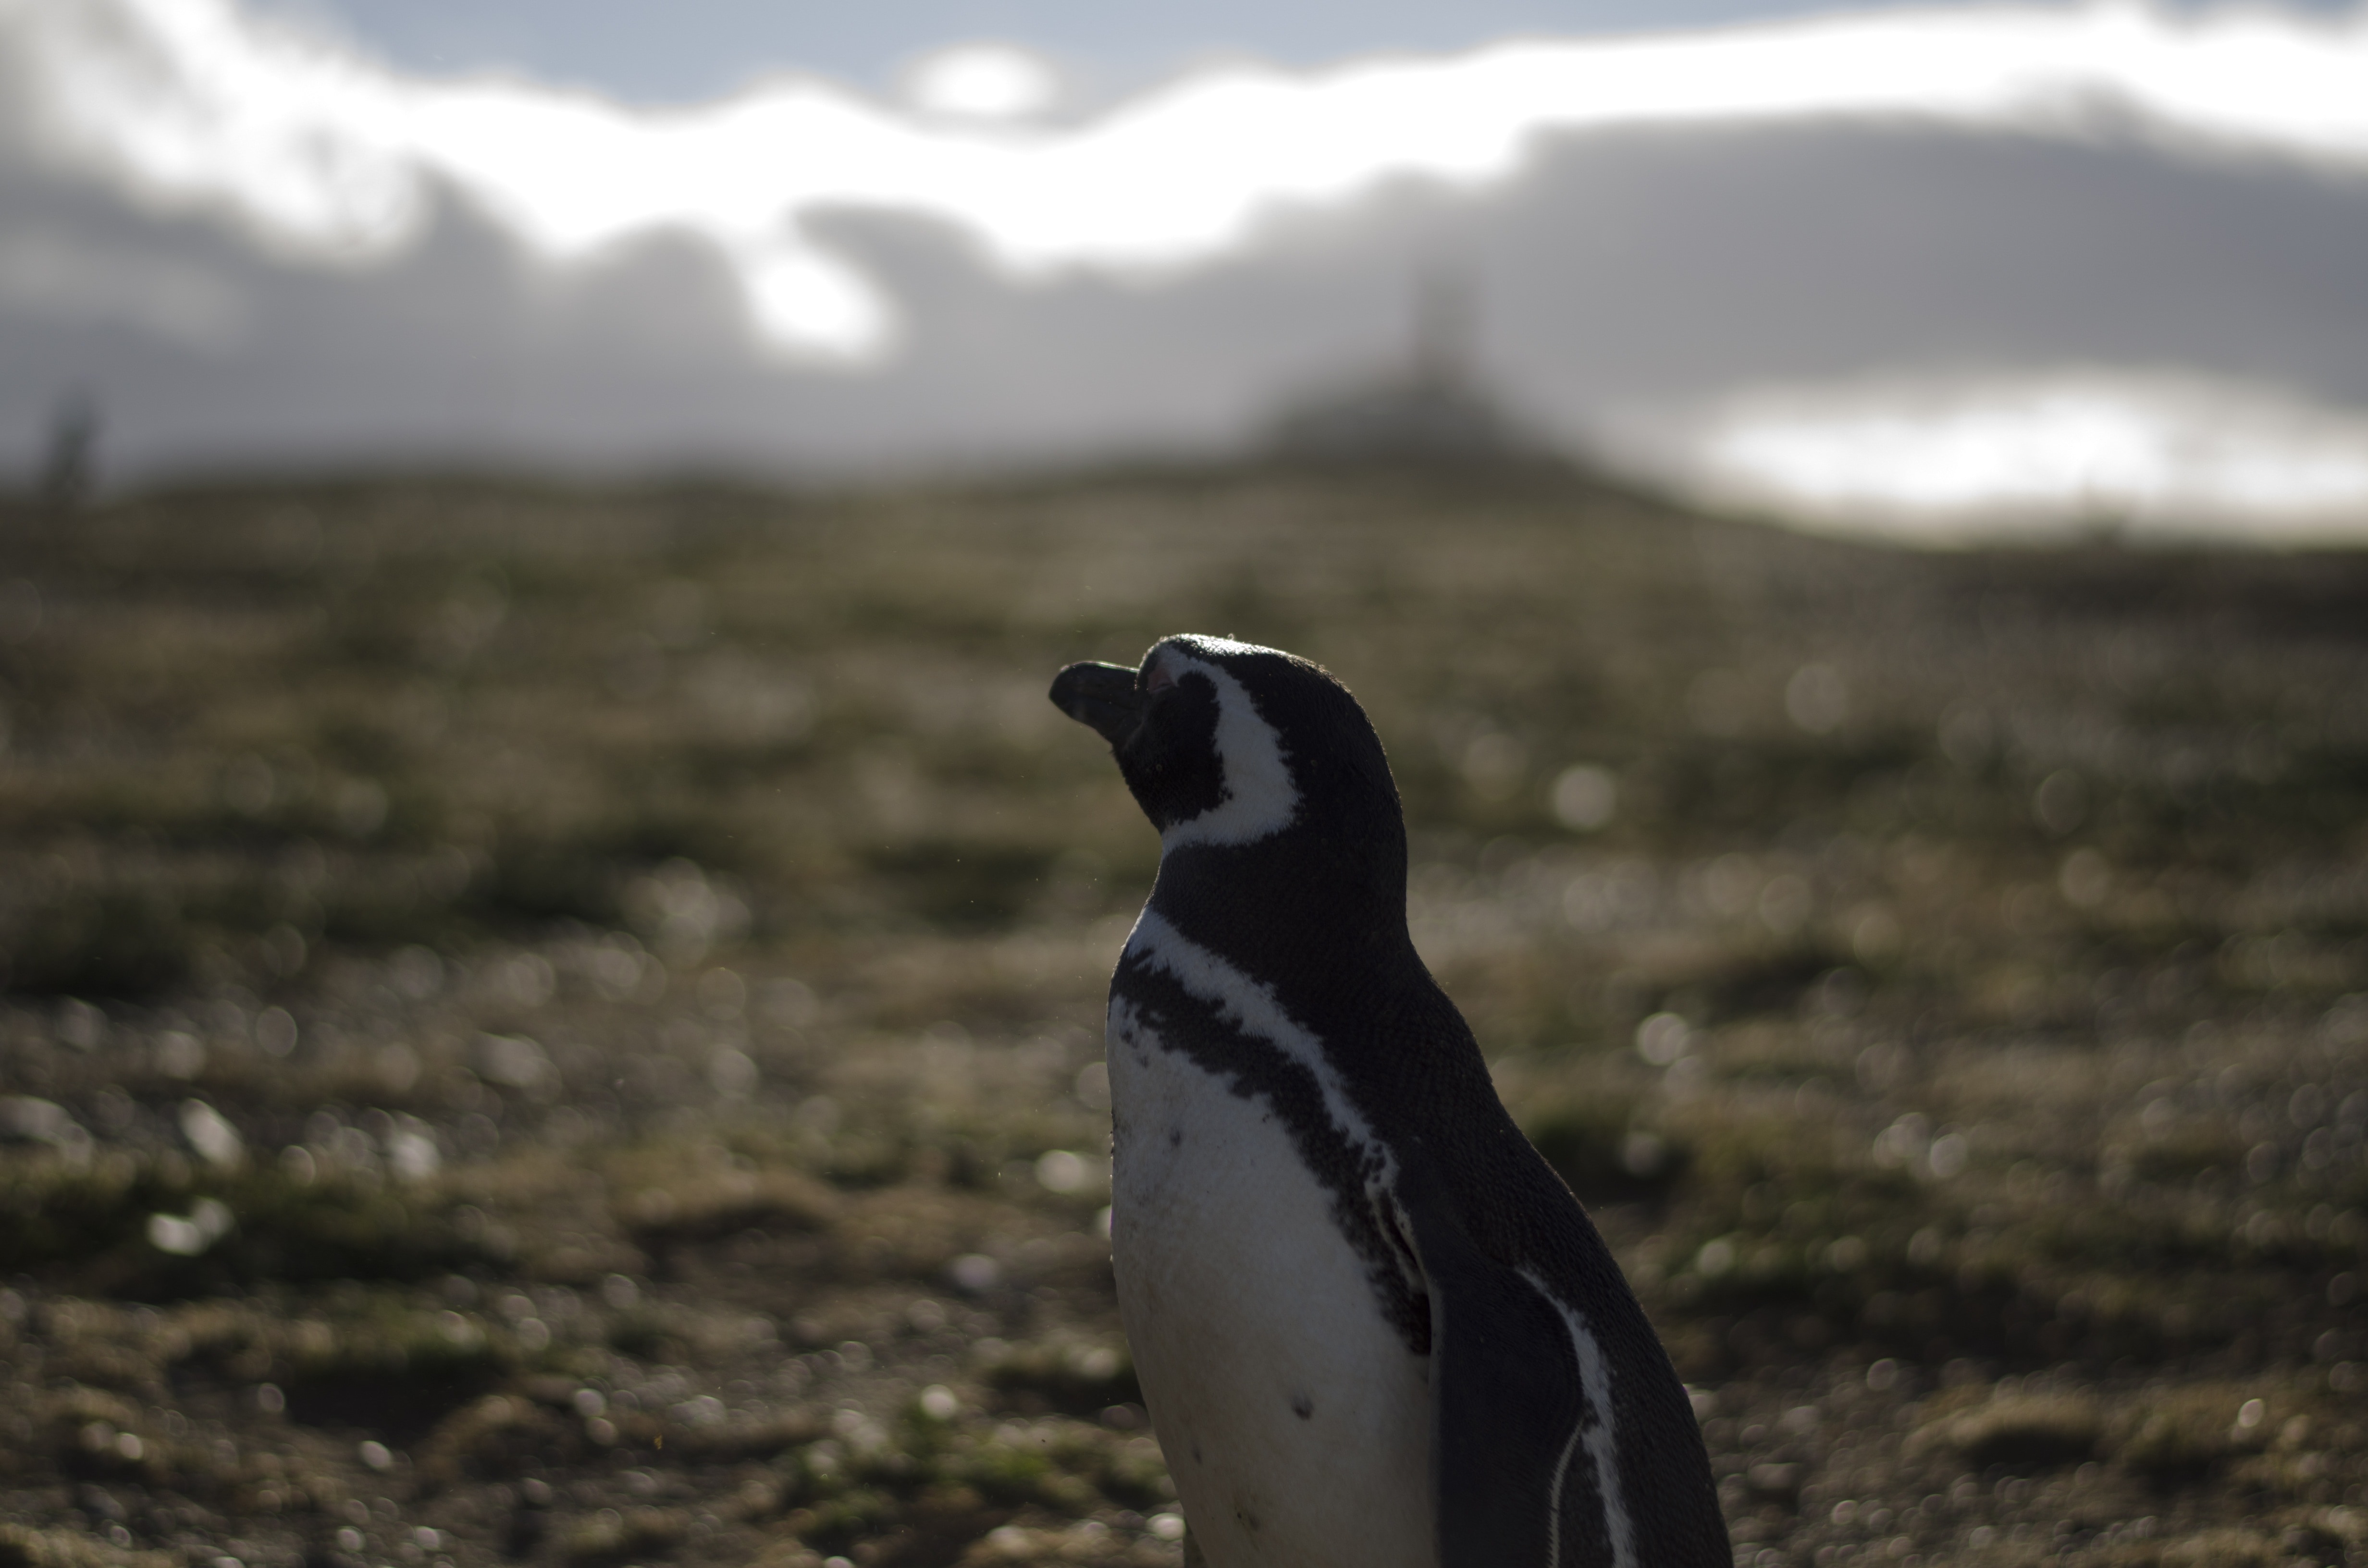 photograpy of penguine